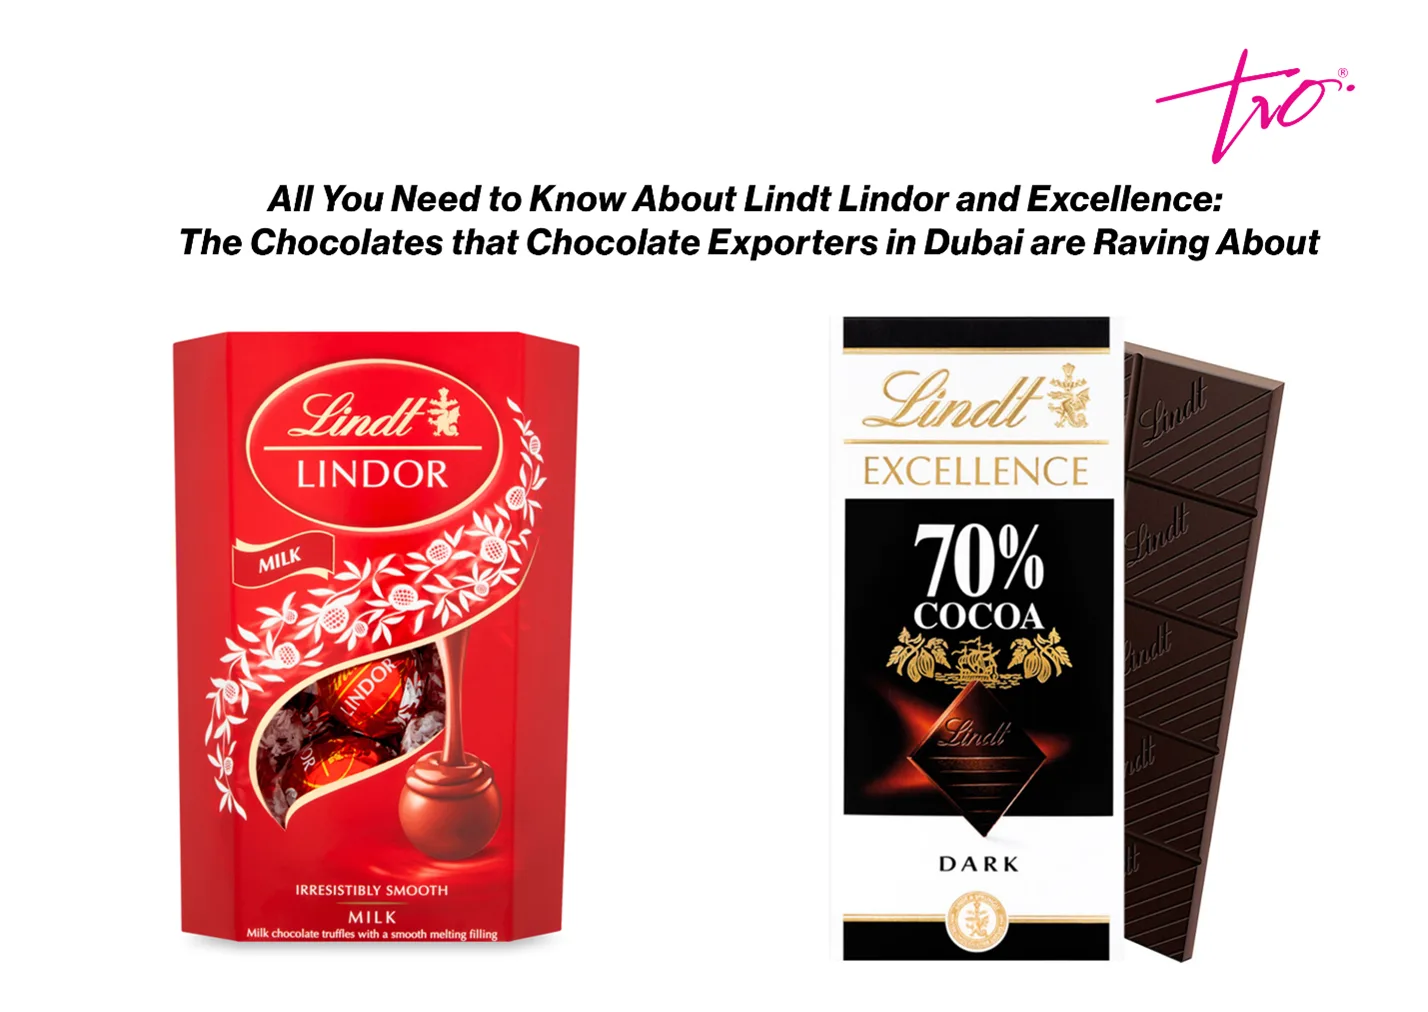 All You Need to Know About Lindt Lindor and Excellence: The Chocolates that Chocolate Exporters in Dubai are Raving About